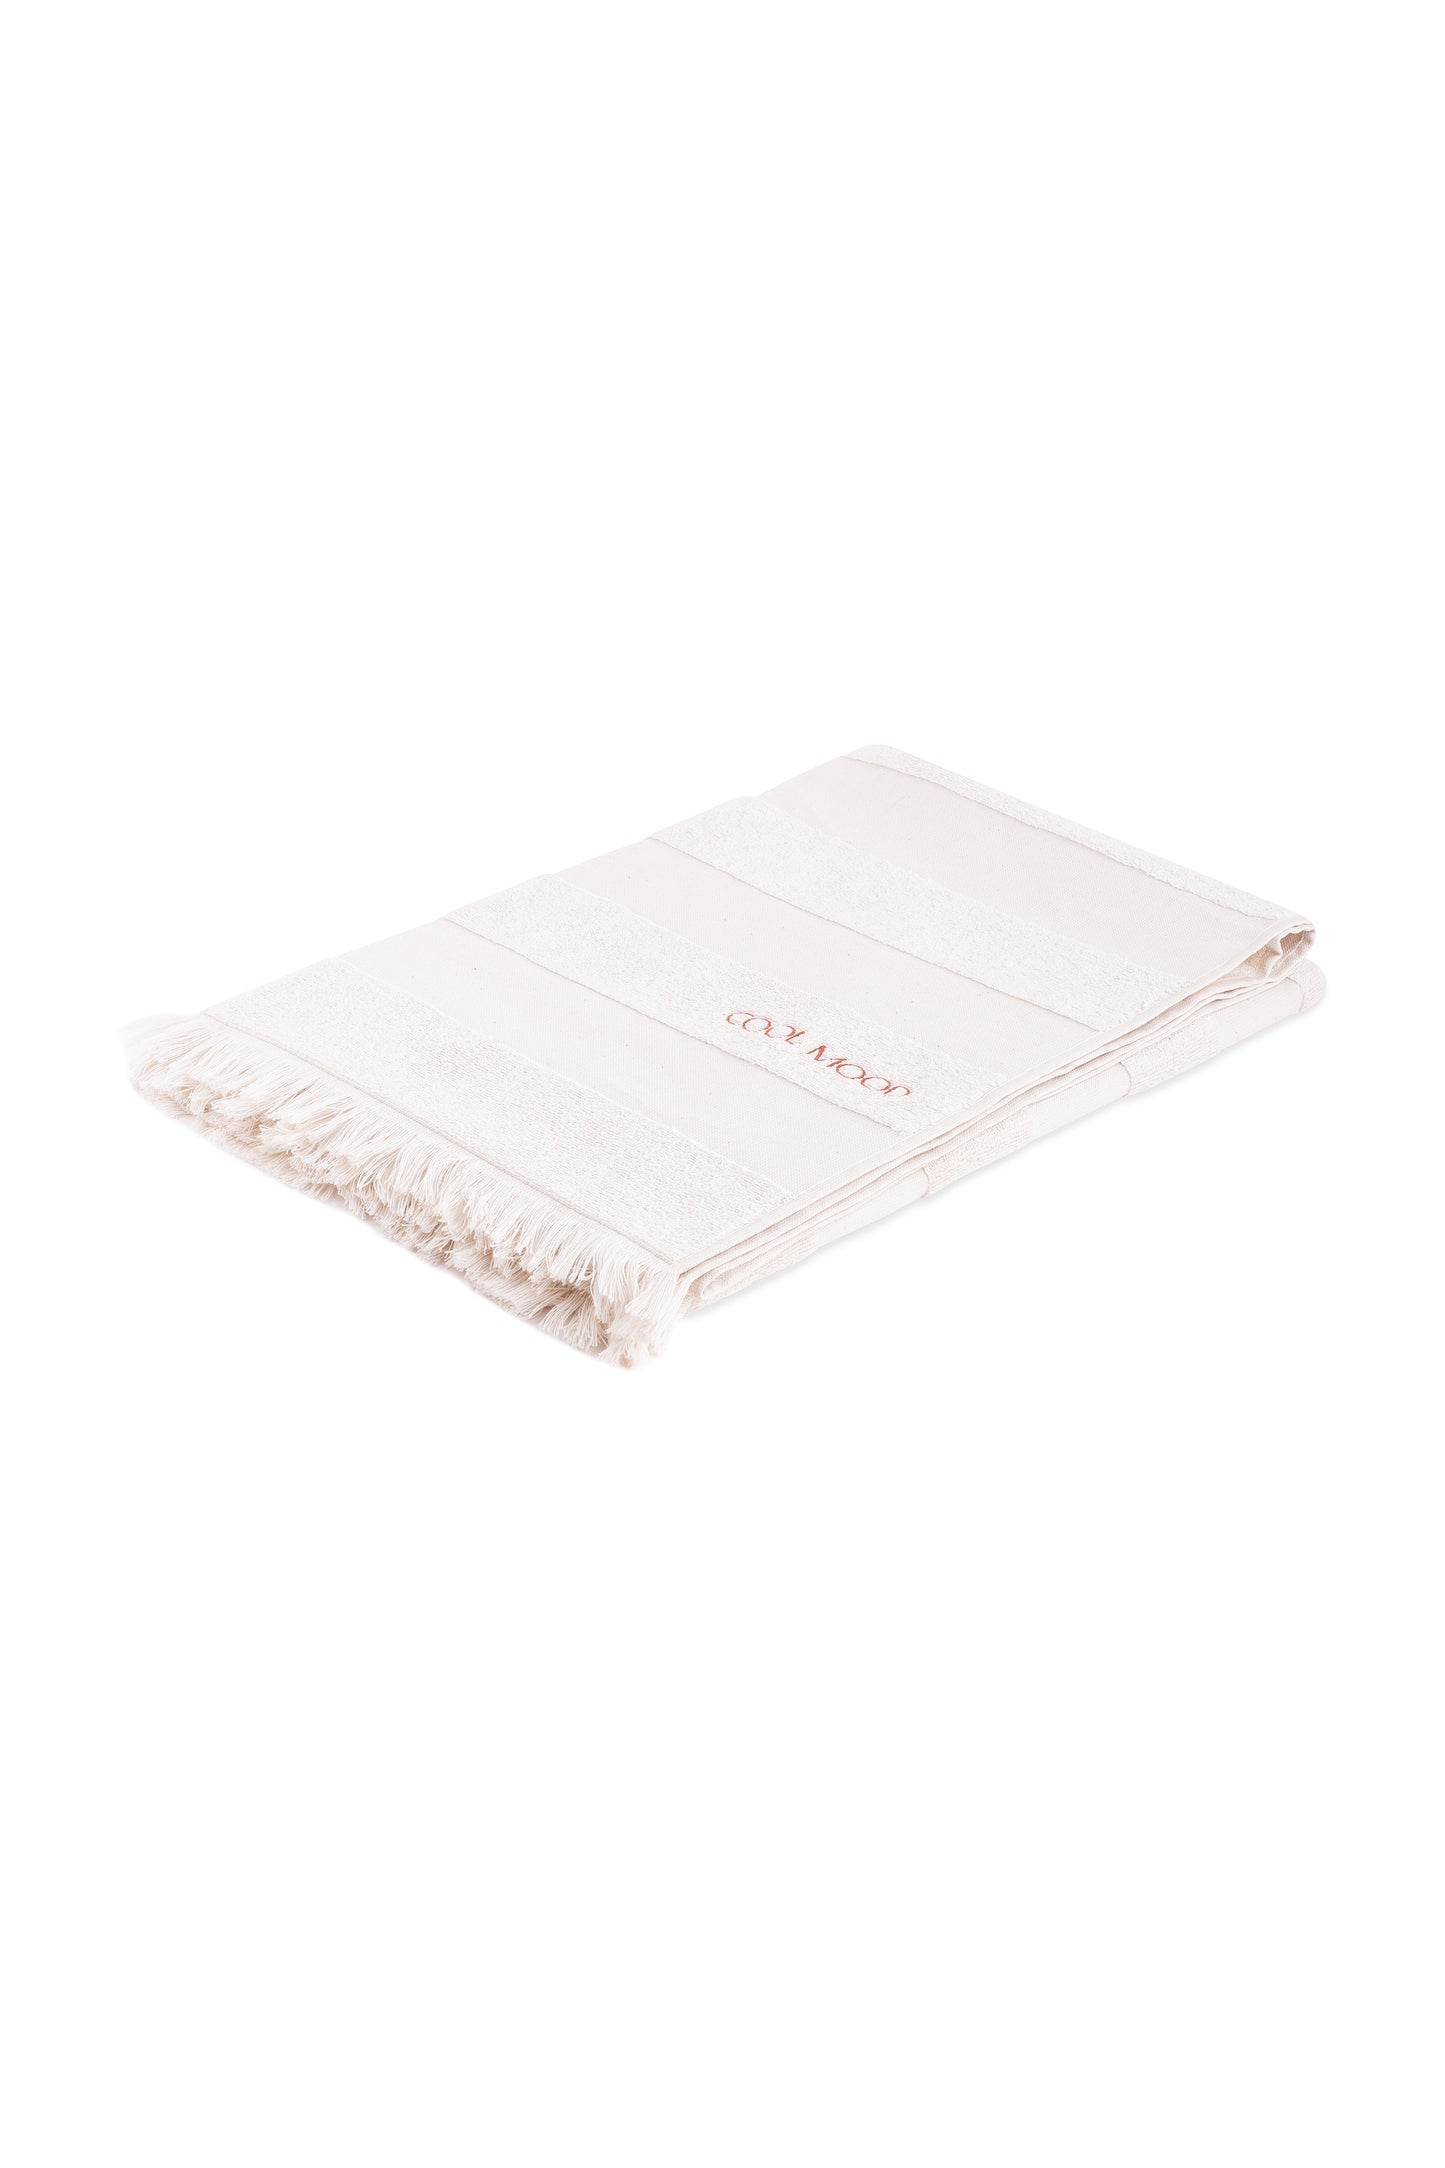 Beach towel in natural shade, with soft terry stripes, eyelash fringing detail and embroidery in rust.